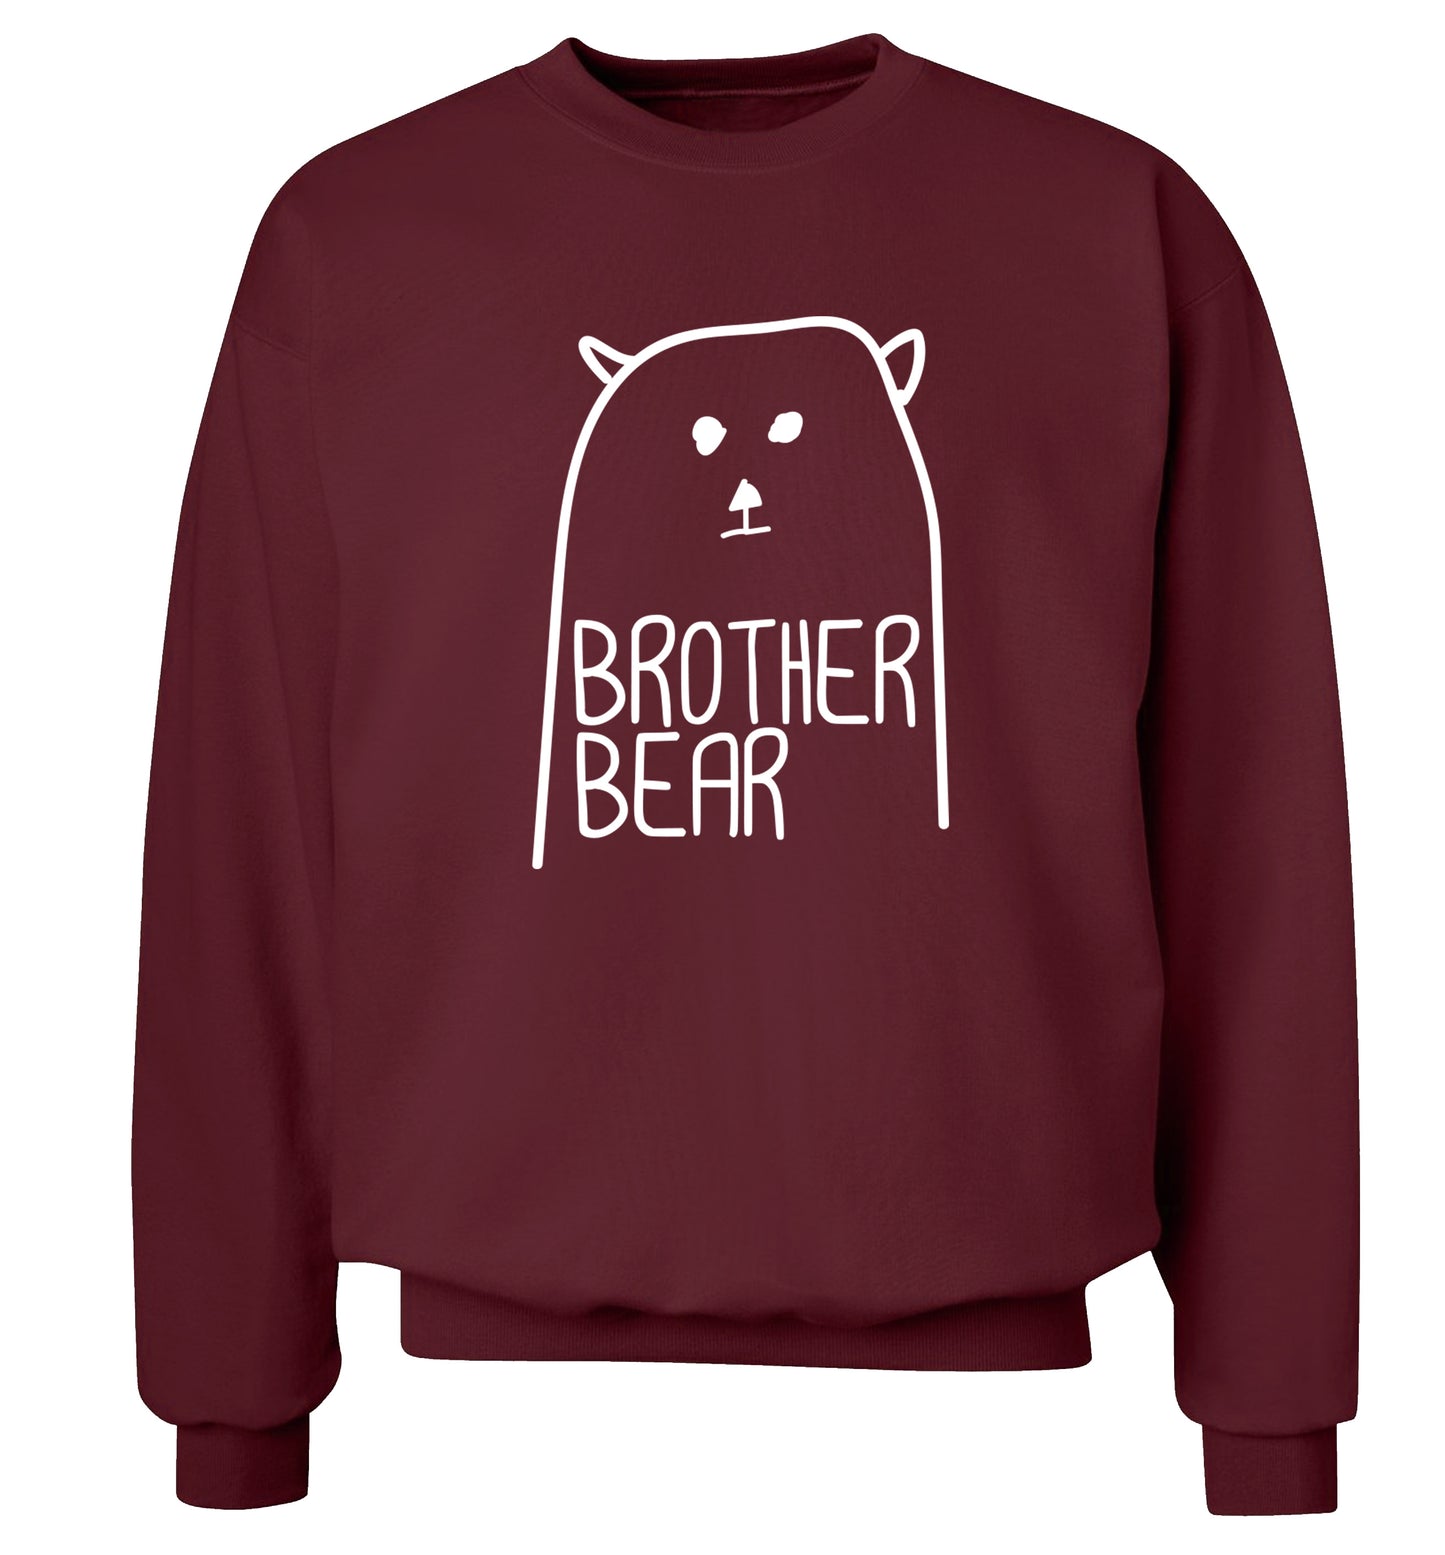 Brother bear Adult's unisex maroon Sweater 2XL